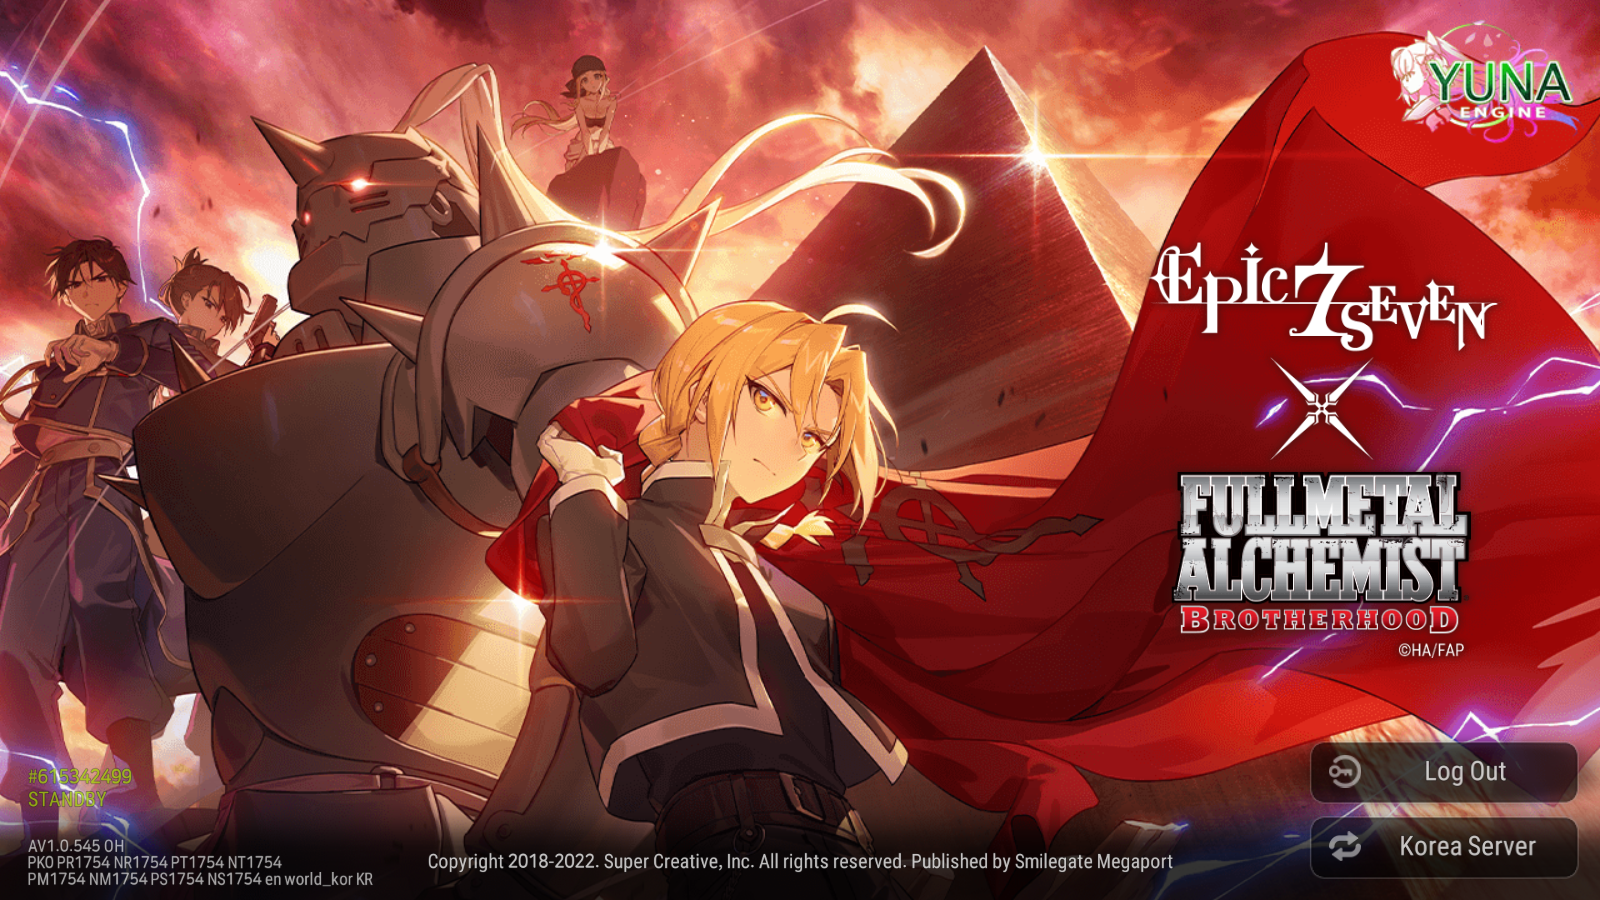 Reality Check: The Fullmetal Alchemist Collaboration on the JP